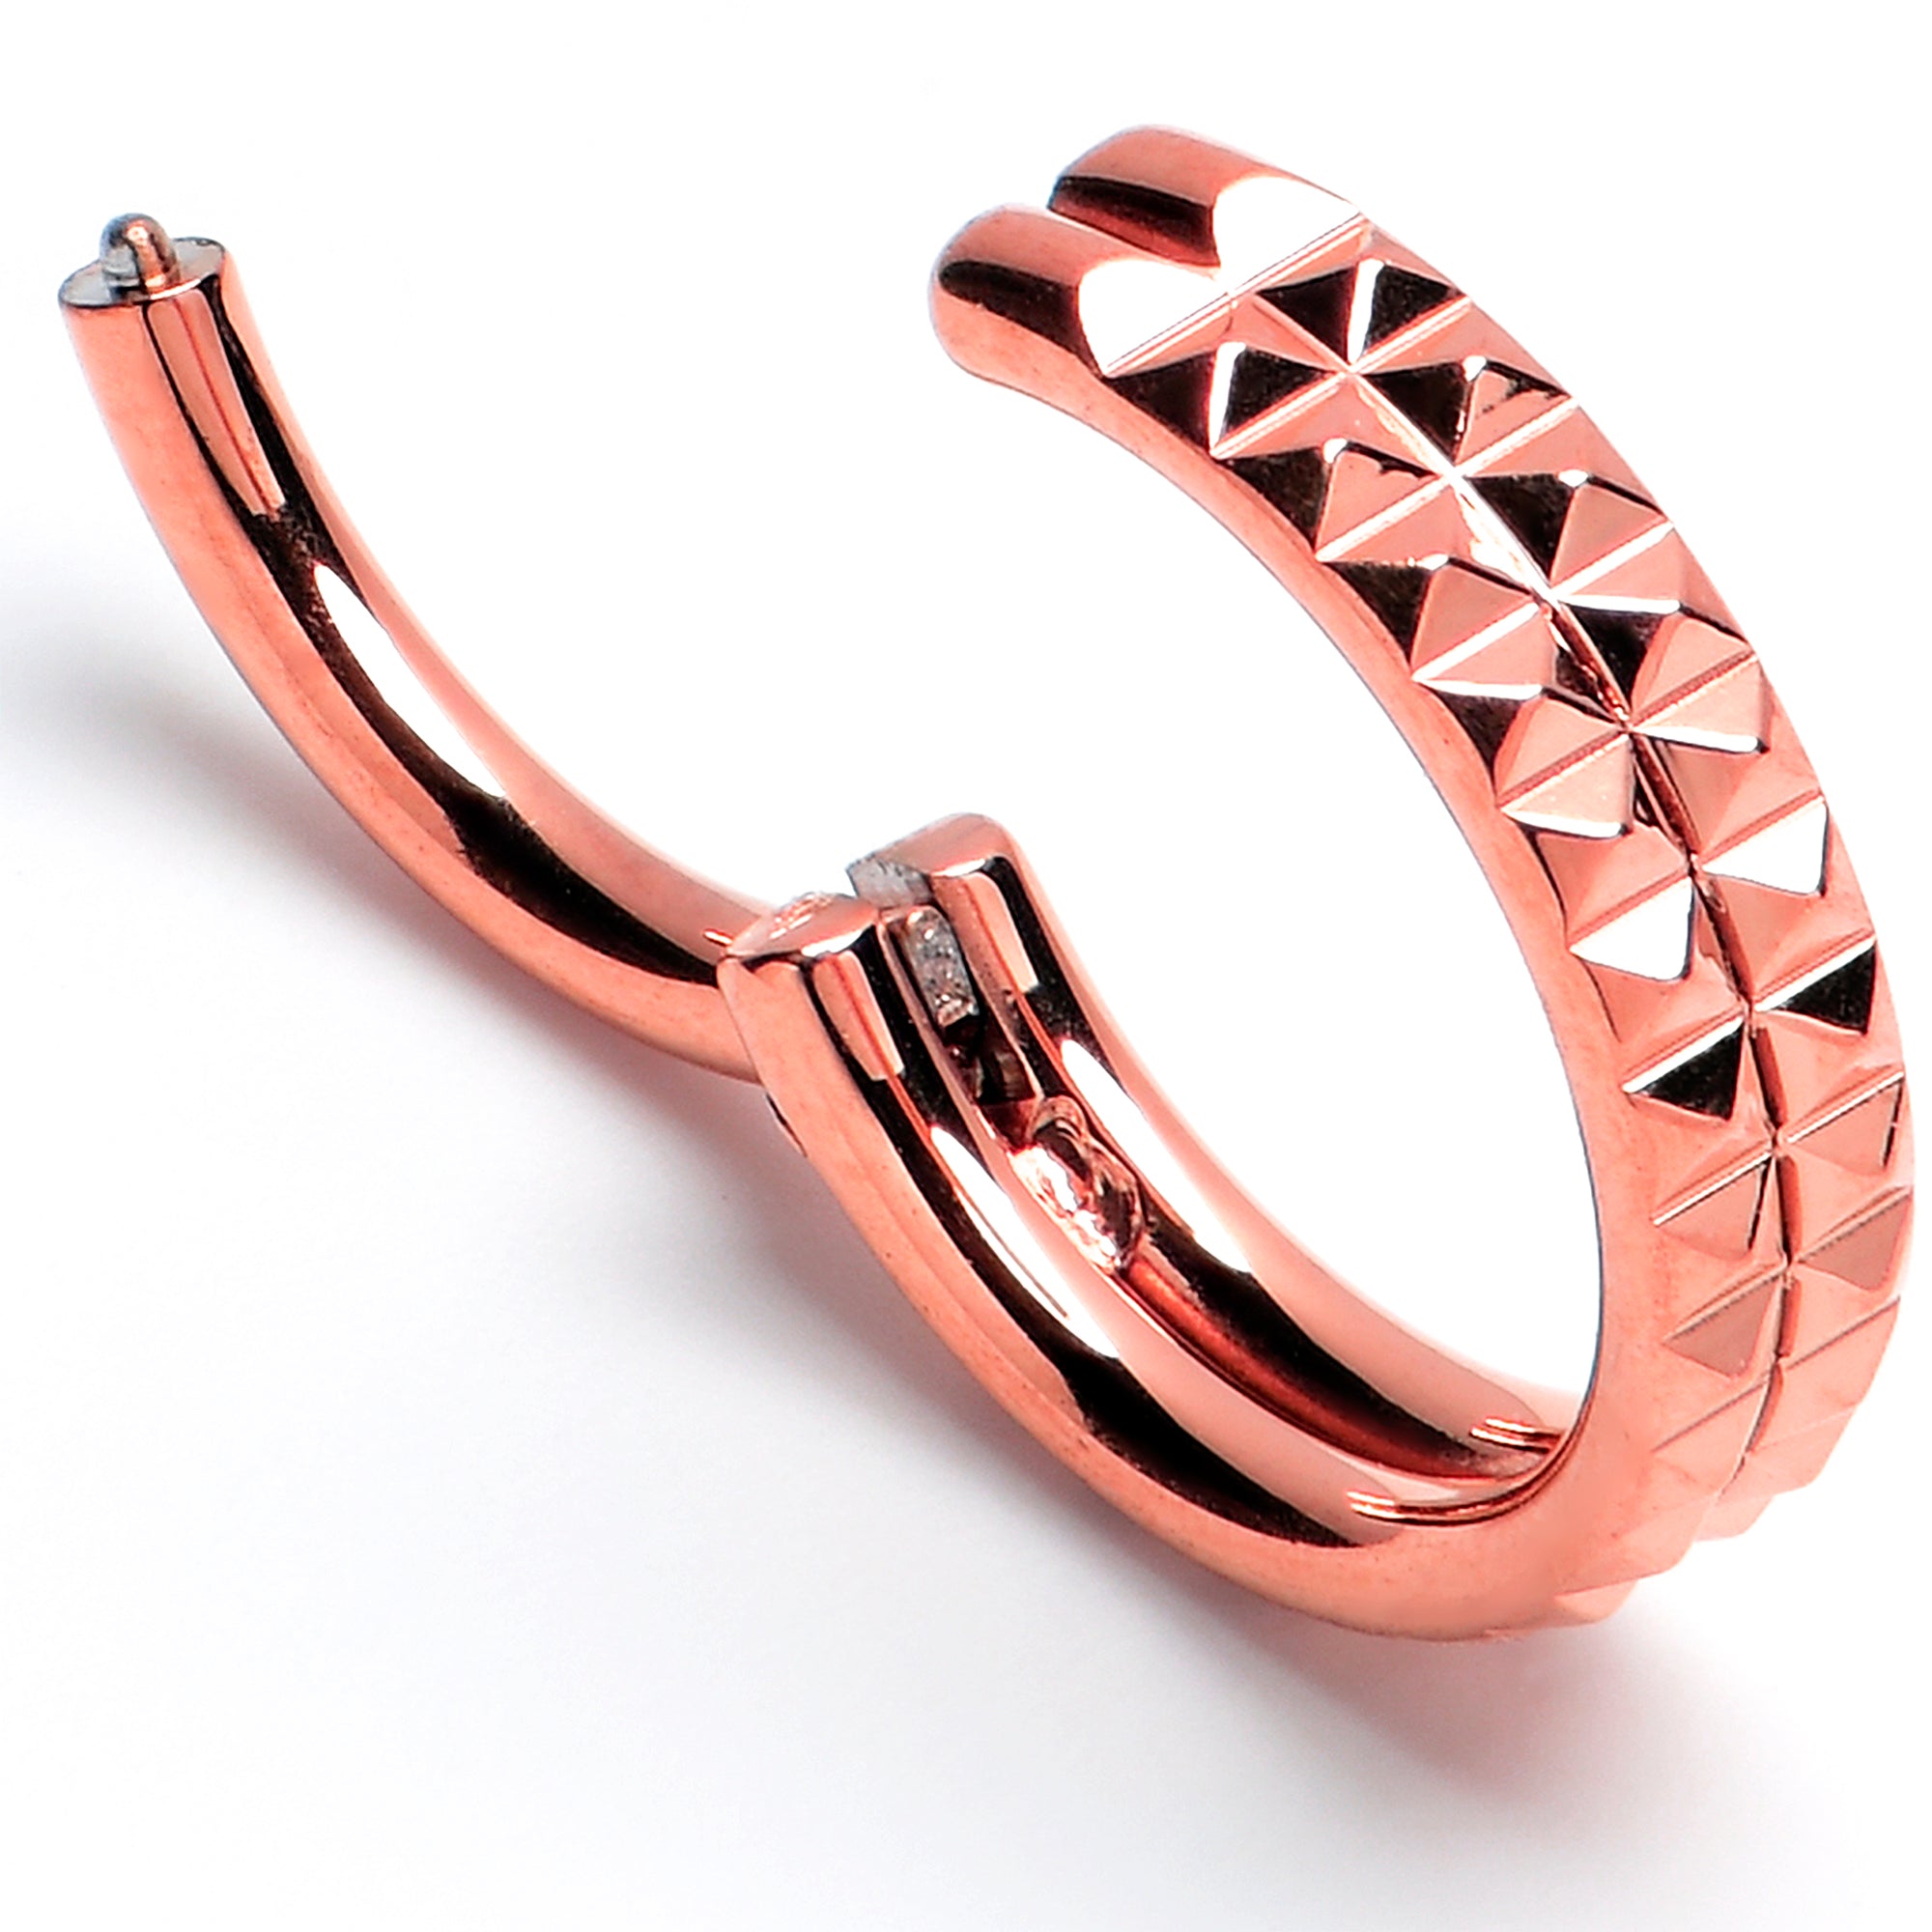 16 Gauge 5/16 Rose Gold PVD Pyramid Cut Double Hoop 316L Surgical Steel Hinged Segment Ring